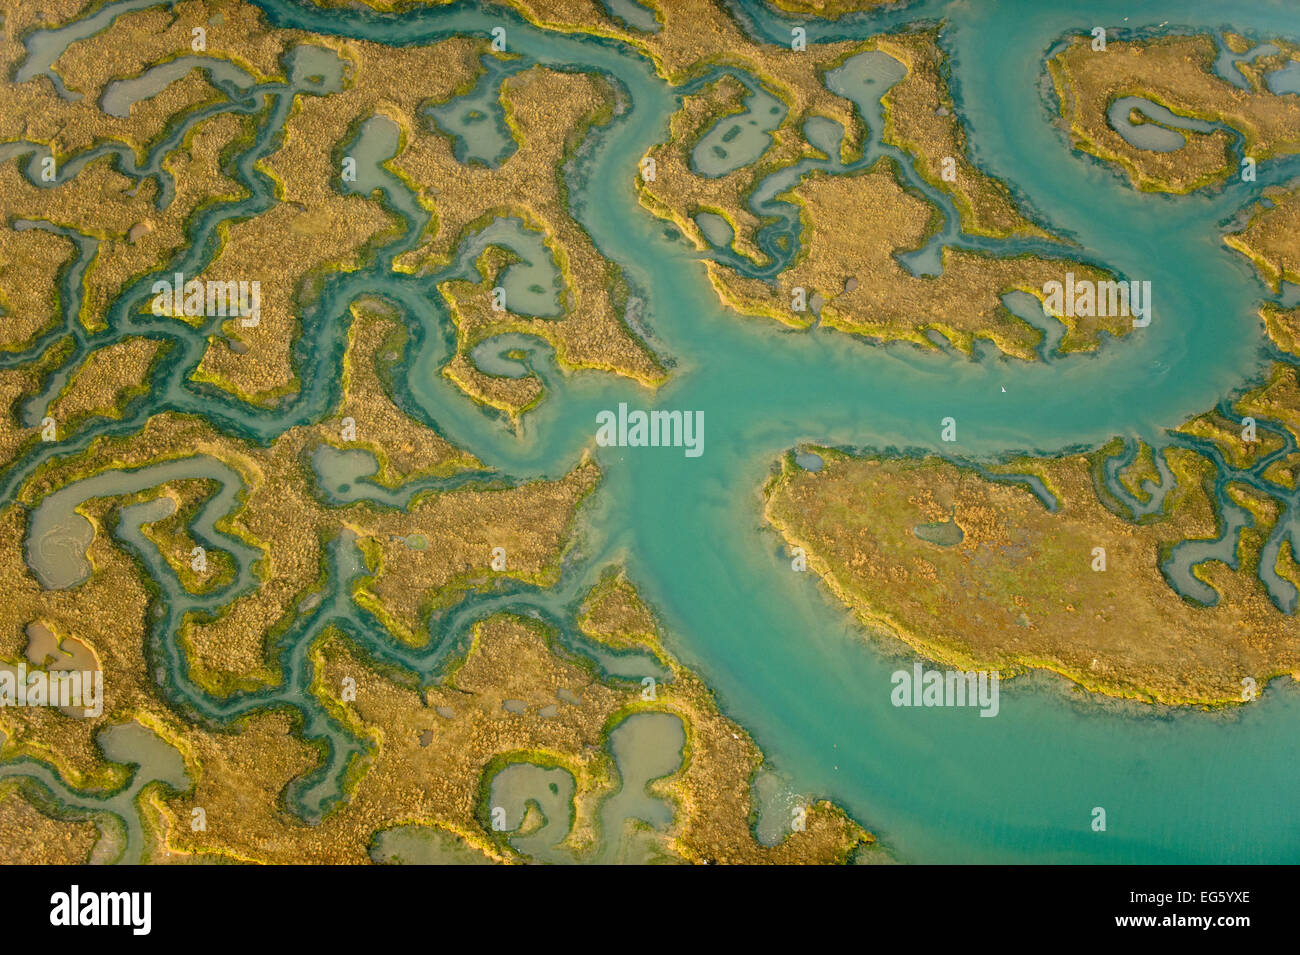 Aerial view of saltmarsh landscape, Abbotts Hall Farm Nature Reserve, Essex, England, UK, March 2012. 2020VISION Exhibition. Did you know? Salt marshes are great for removing and storing carbon dioxide from the atmosphere. Stock Photo